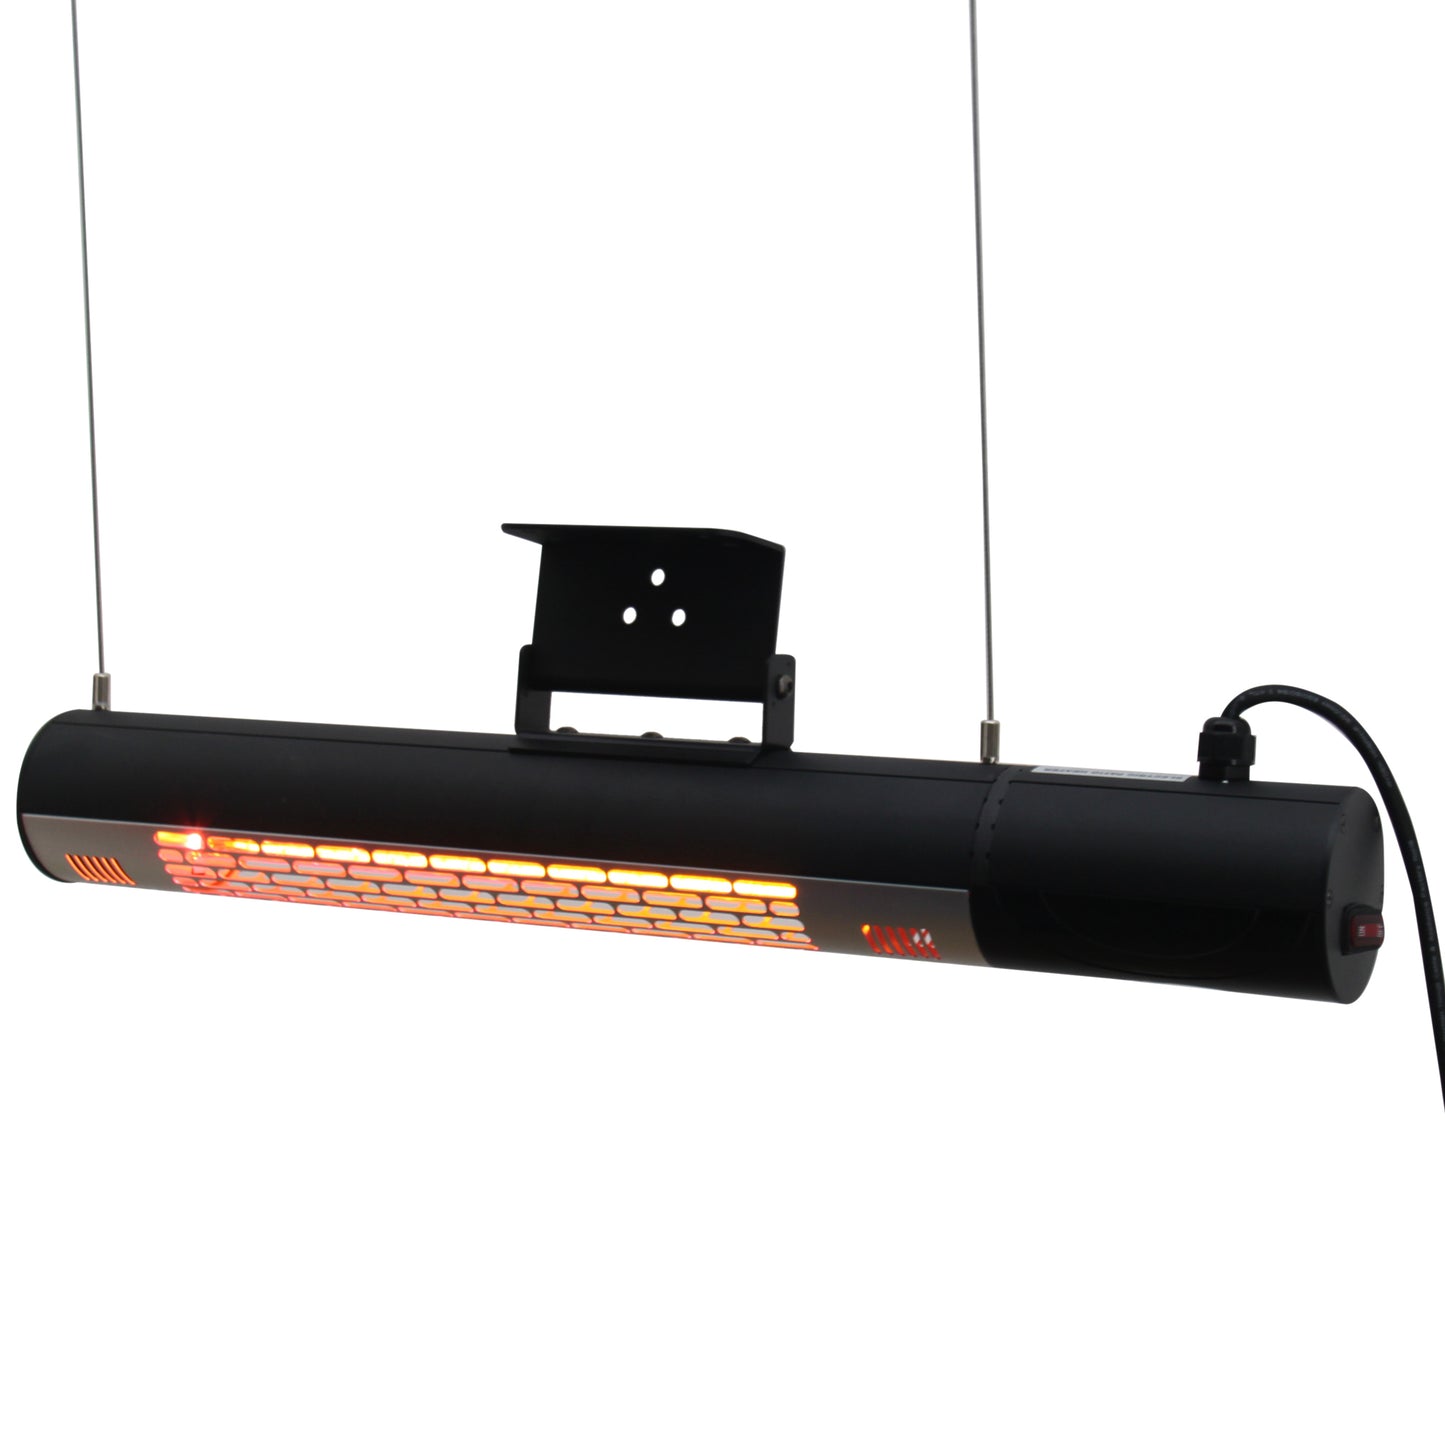 Outsunny Outdoor Wall Mount Electric Halogen Heater, 1500W-Black